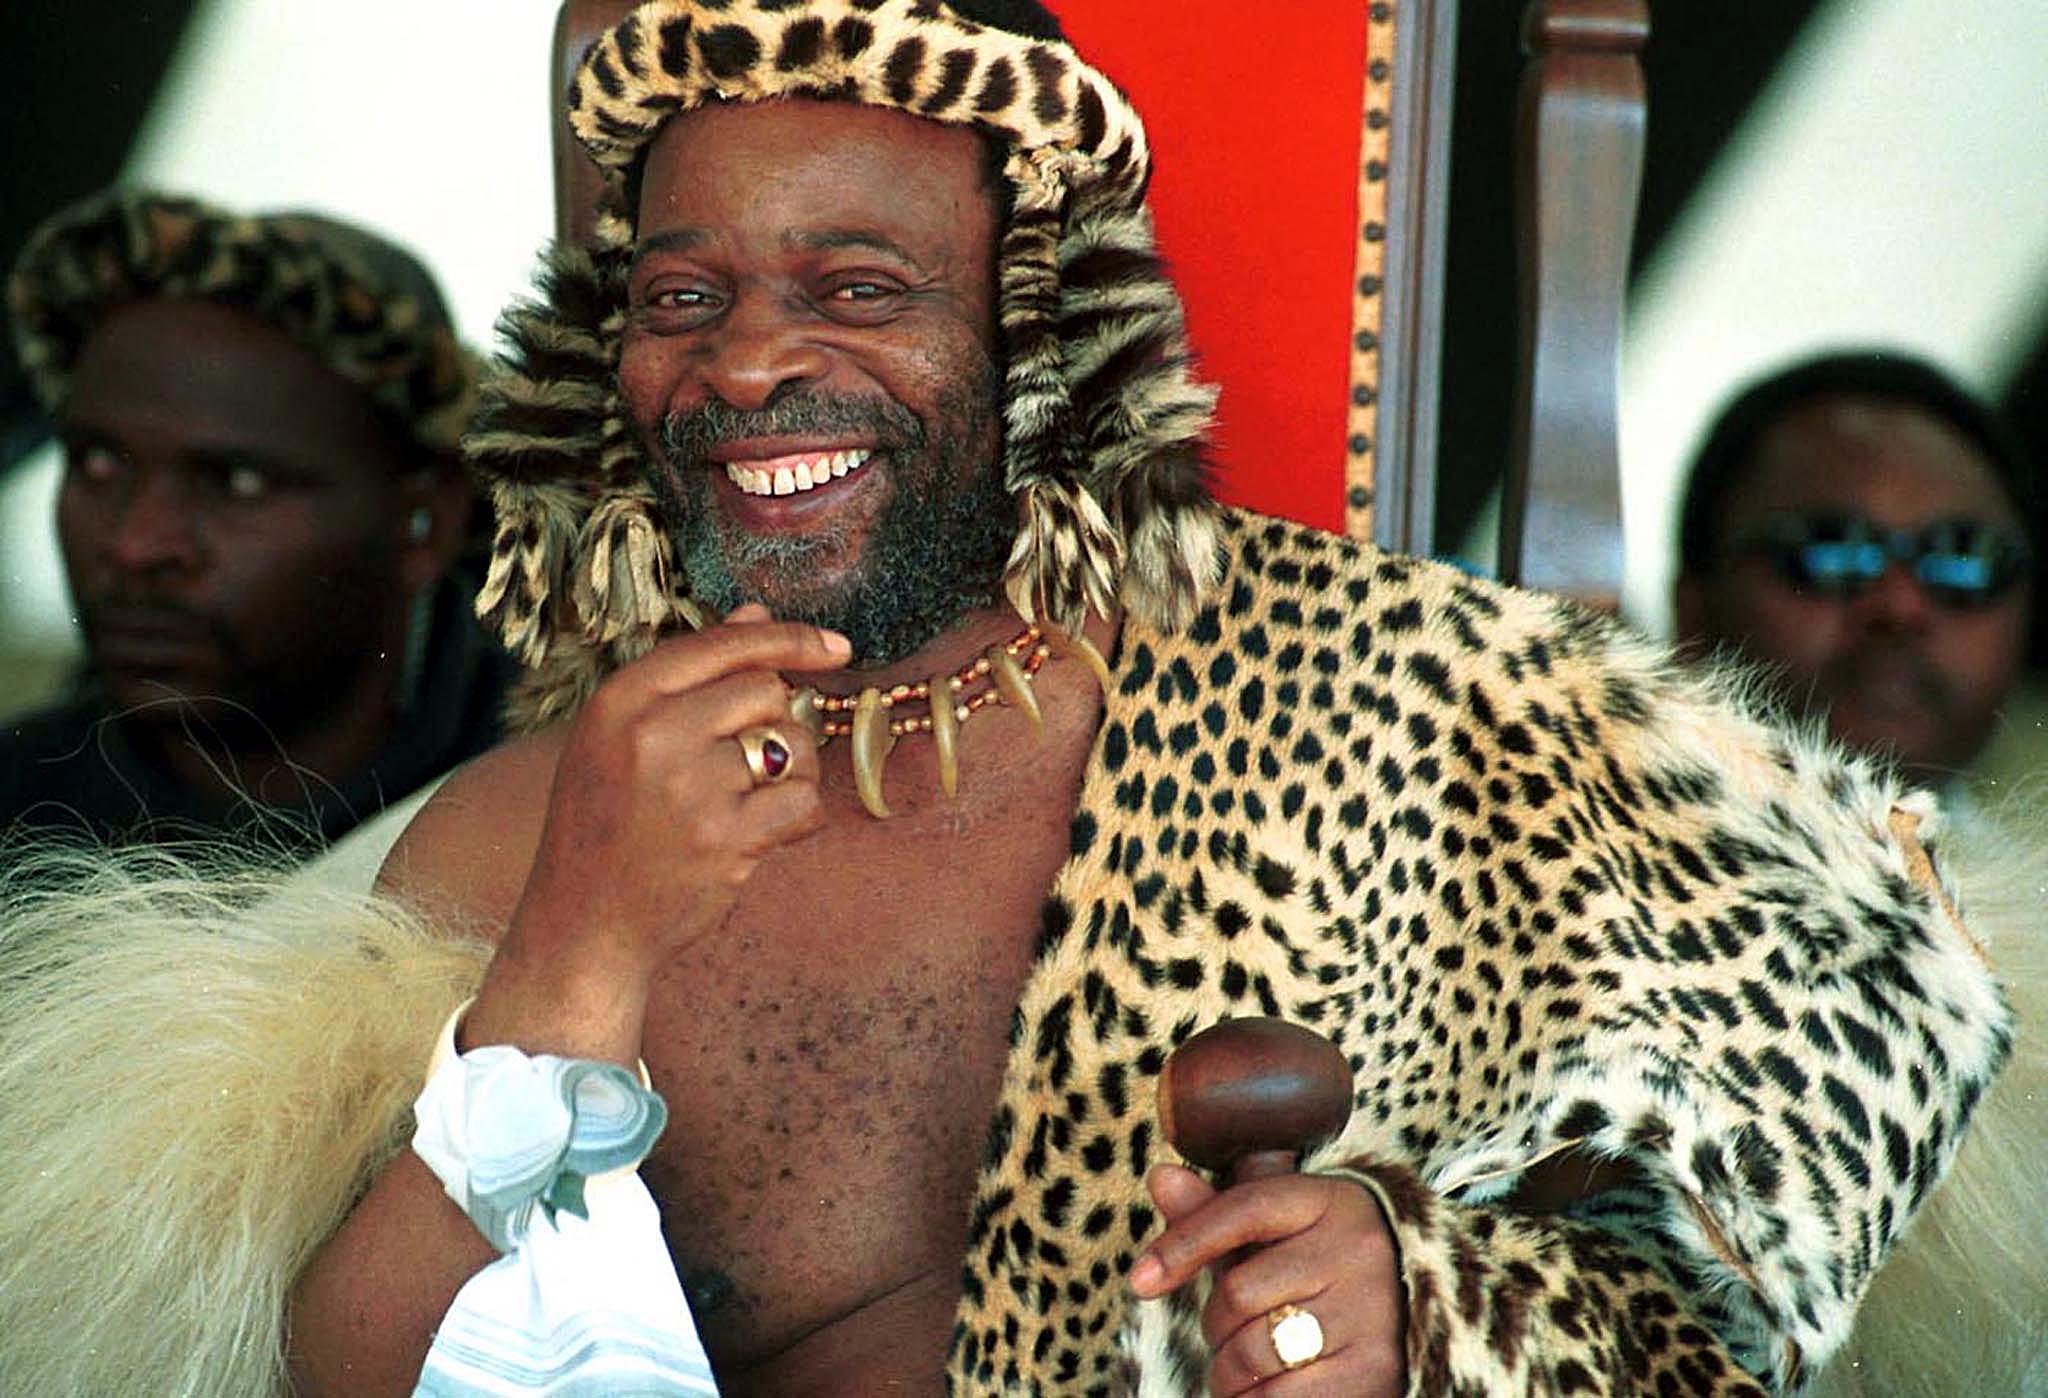 King Goodwill Zwelithini was a descendant of the family of King Shaka Zulu